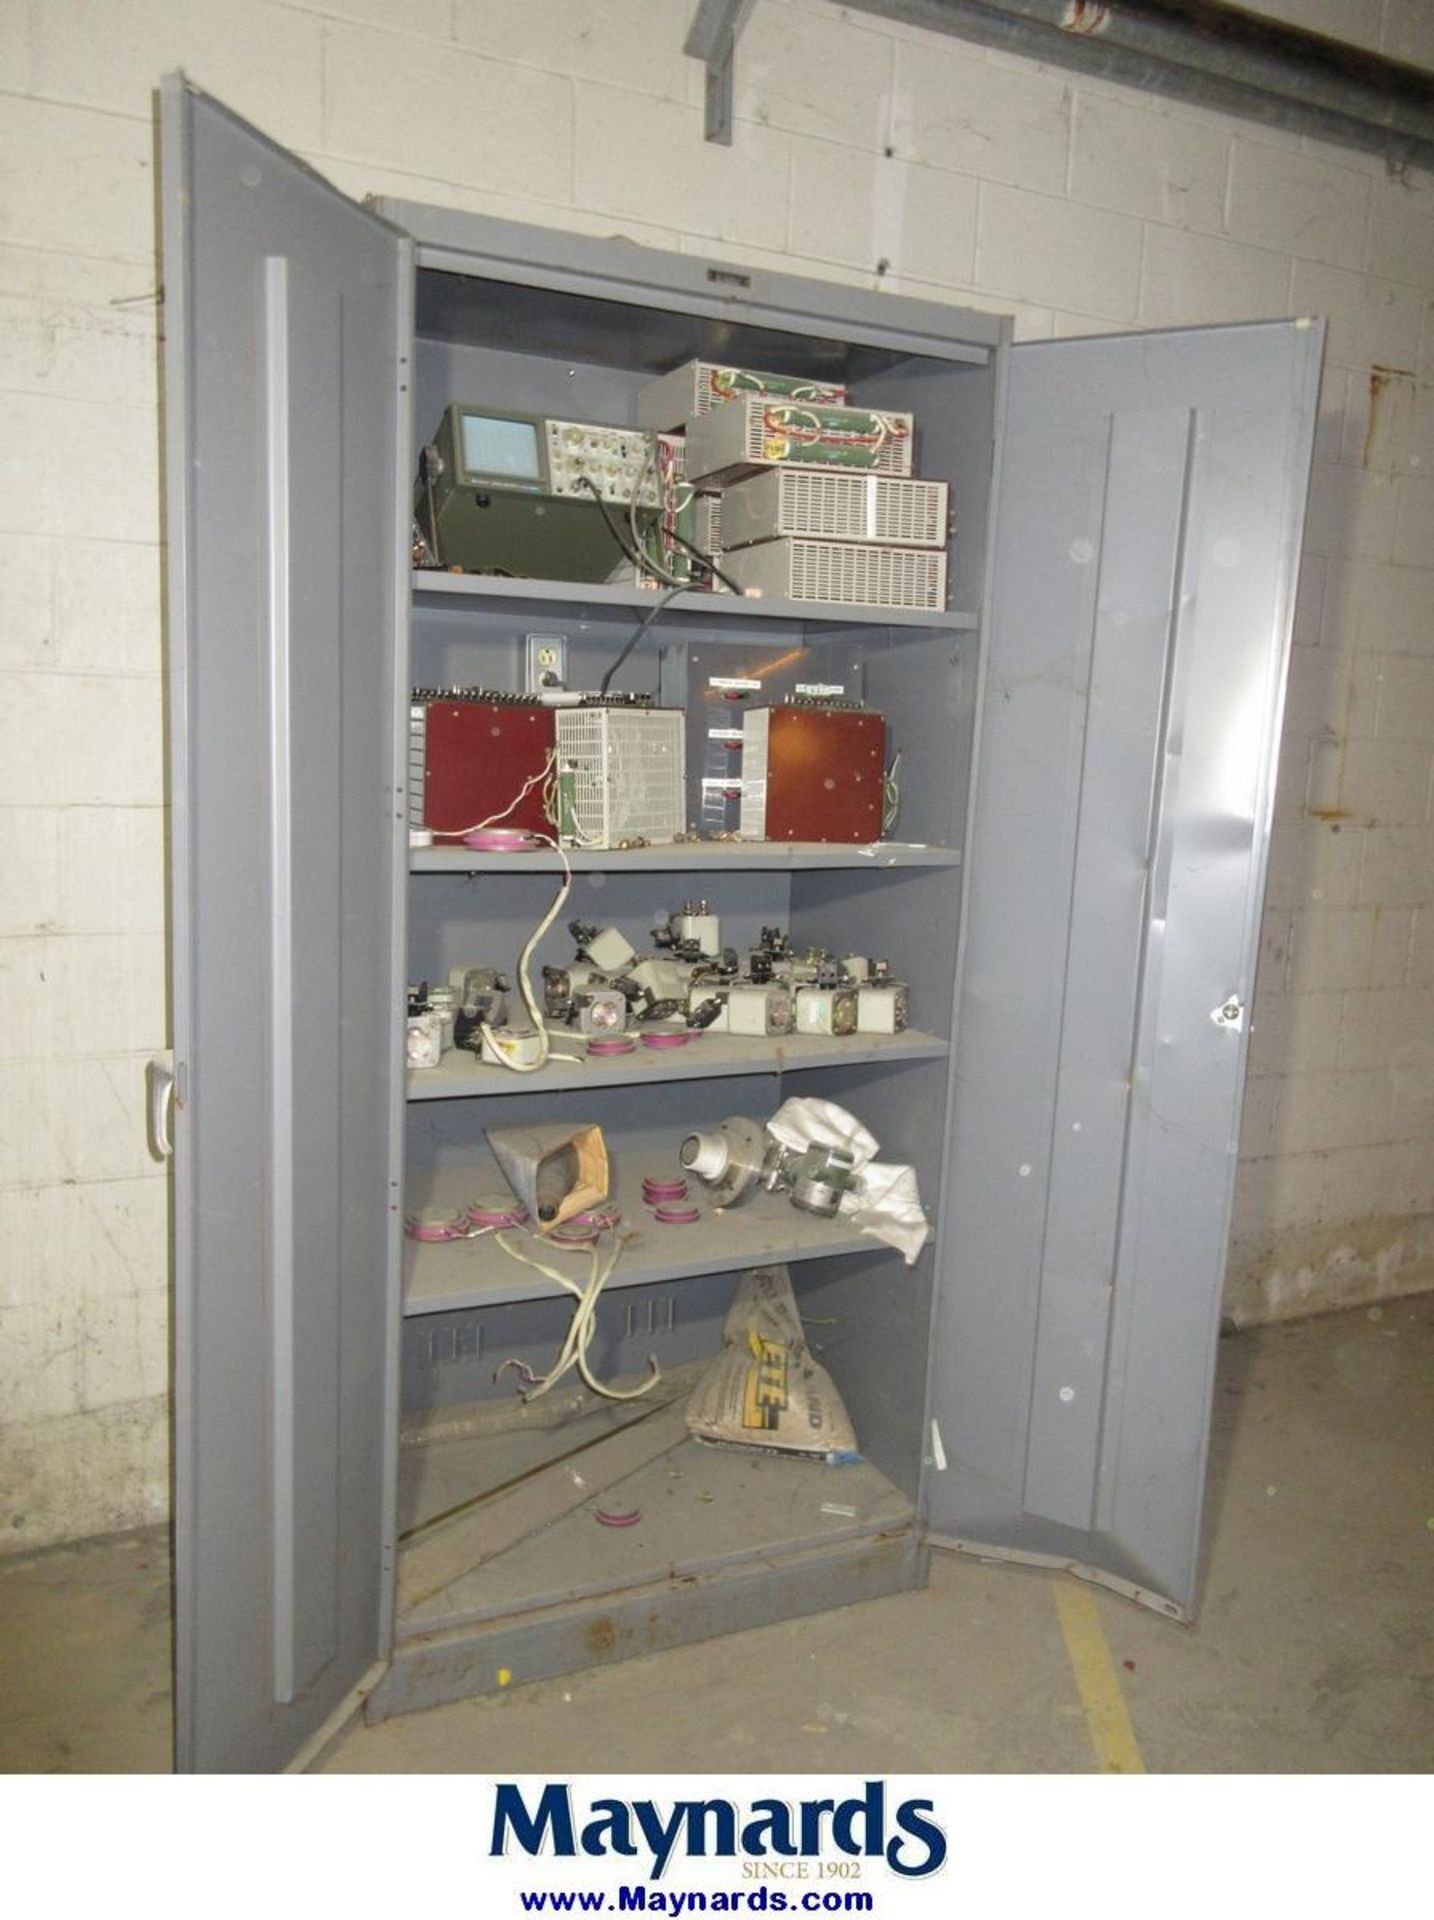 Contents of Electrical Maint. Room - Image 20 of 23